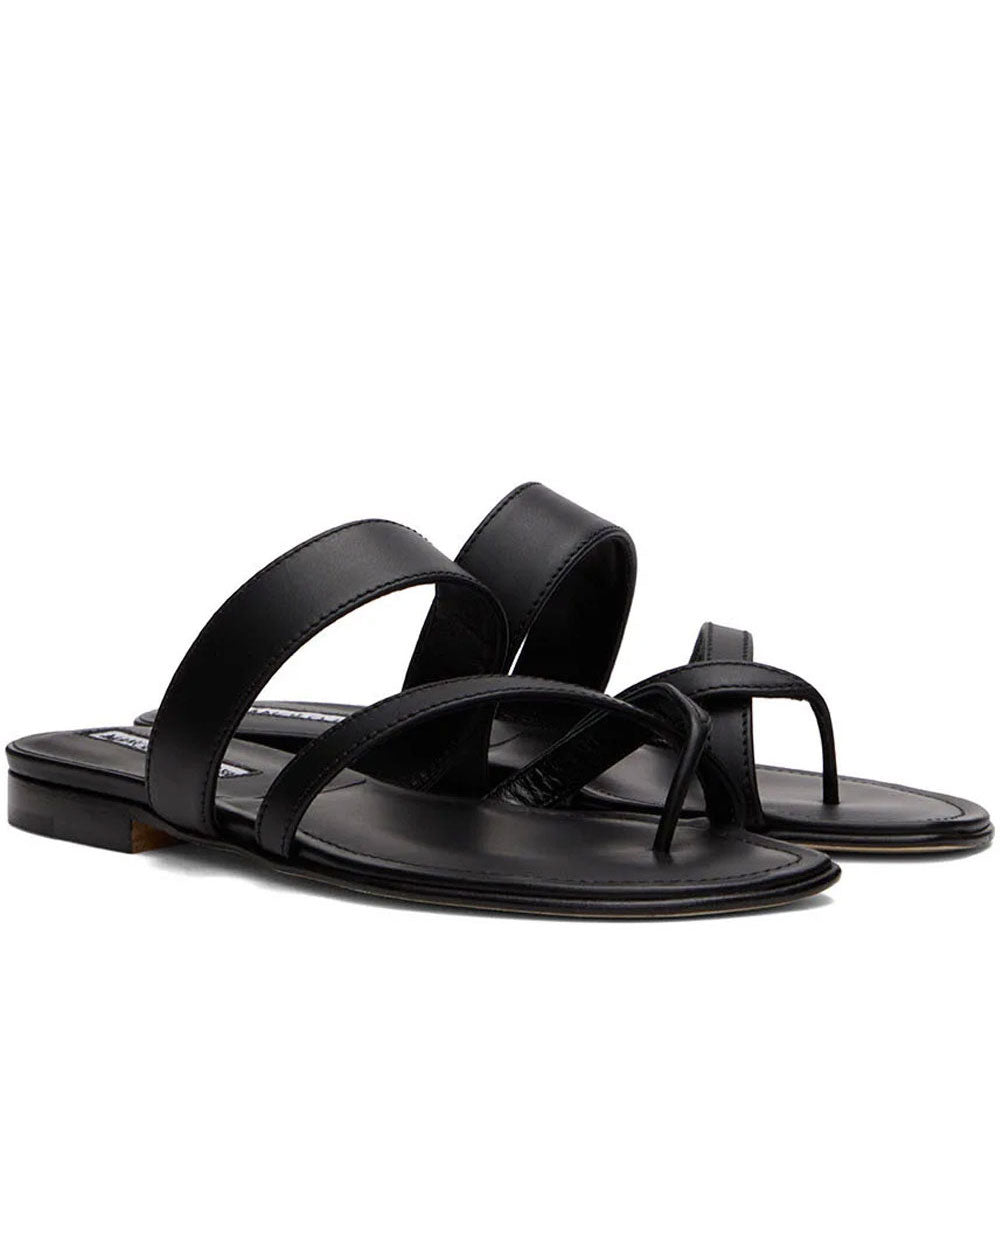 Susa Flat Leather Sandals in Black